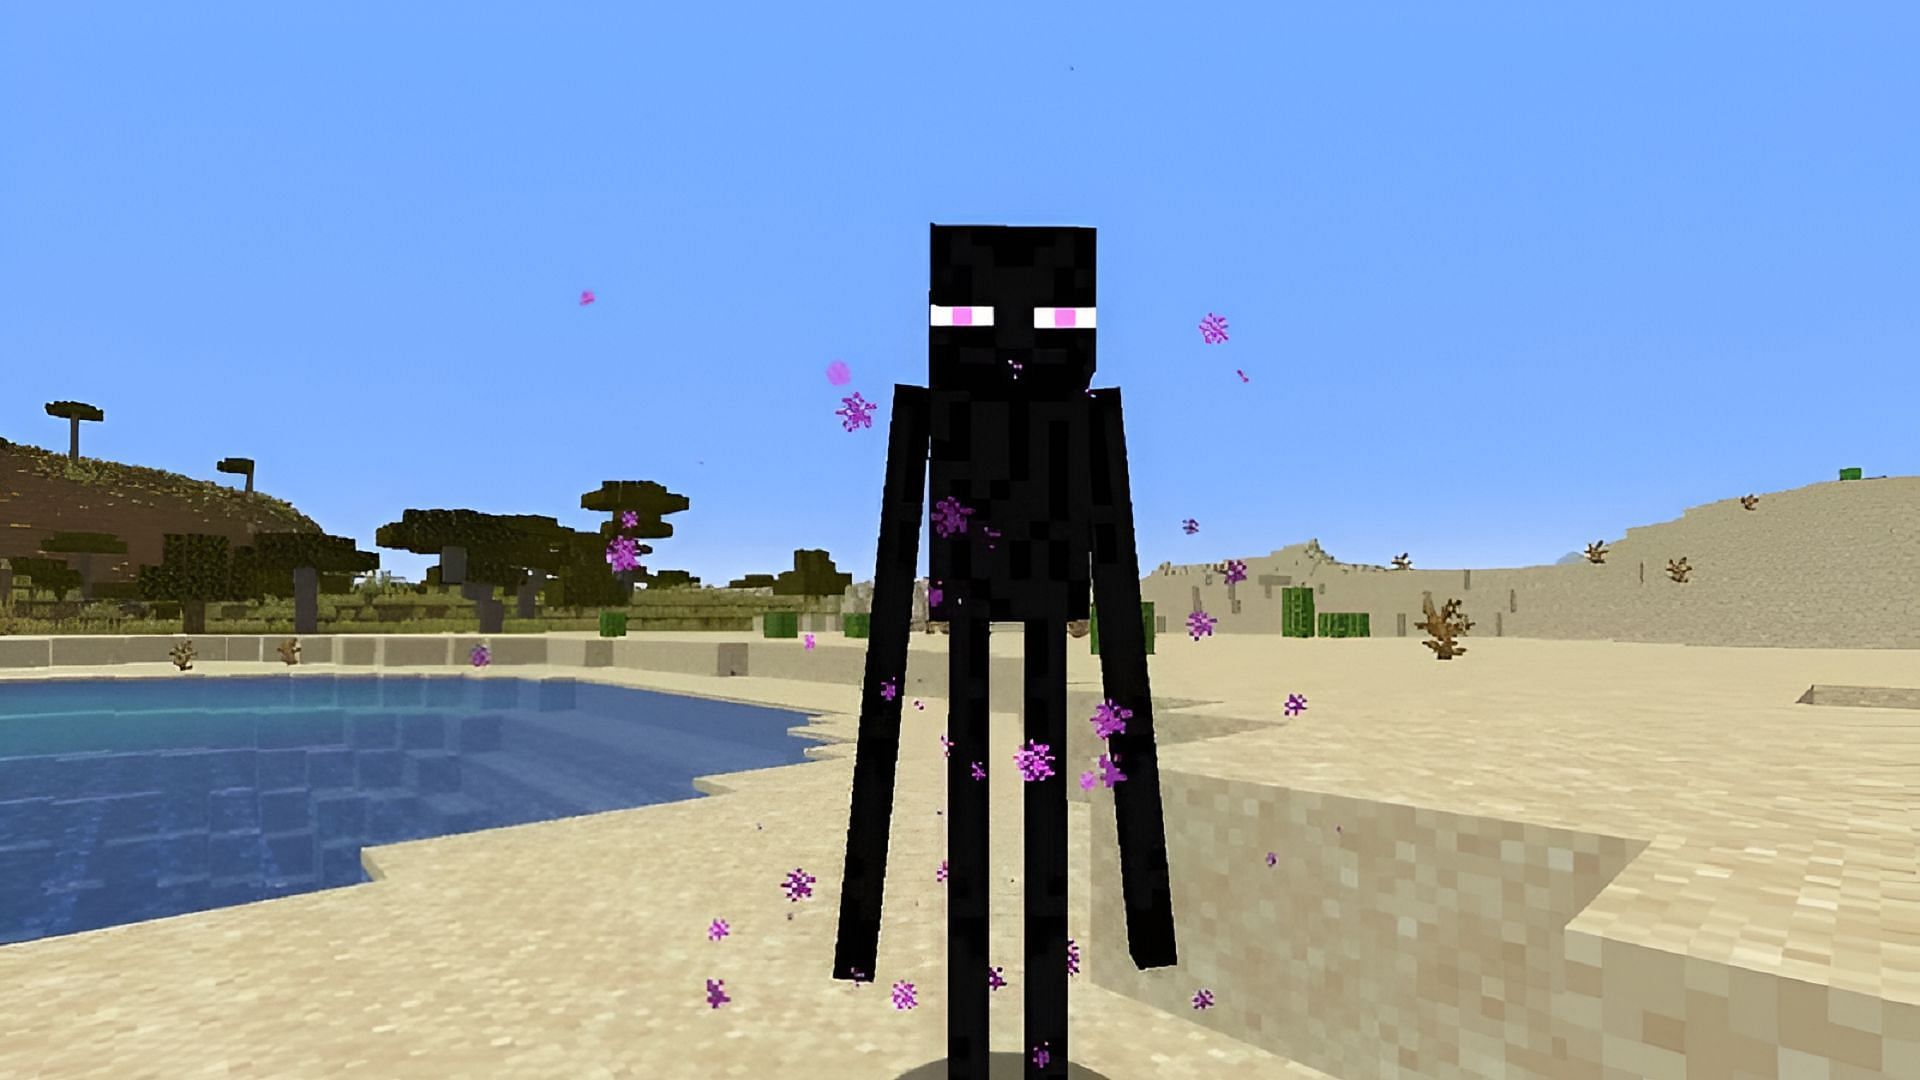 One Minecraft fan went all-out on an enderman costume for Halloween this year (Image via Mojang)